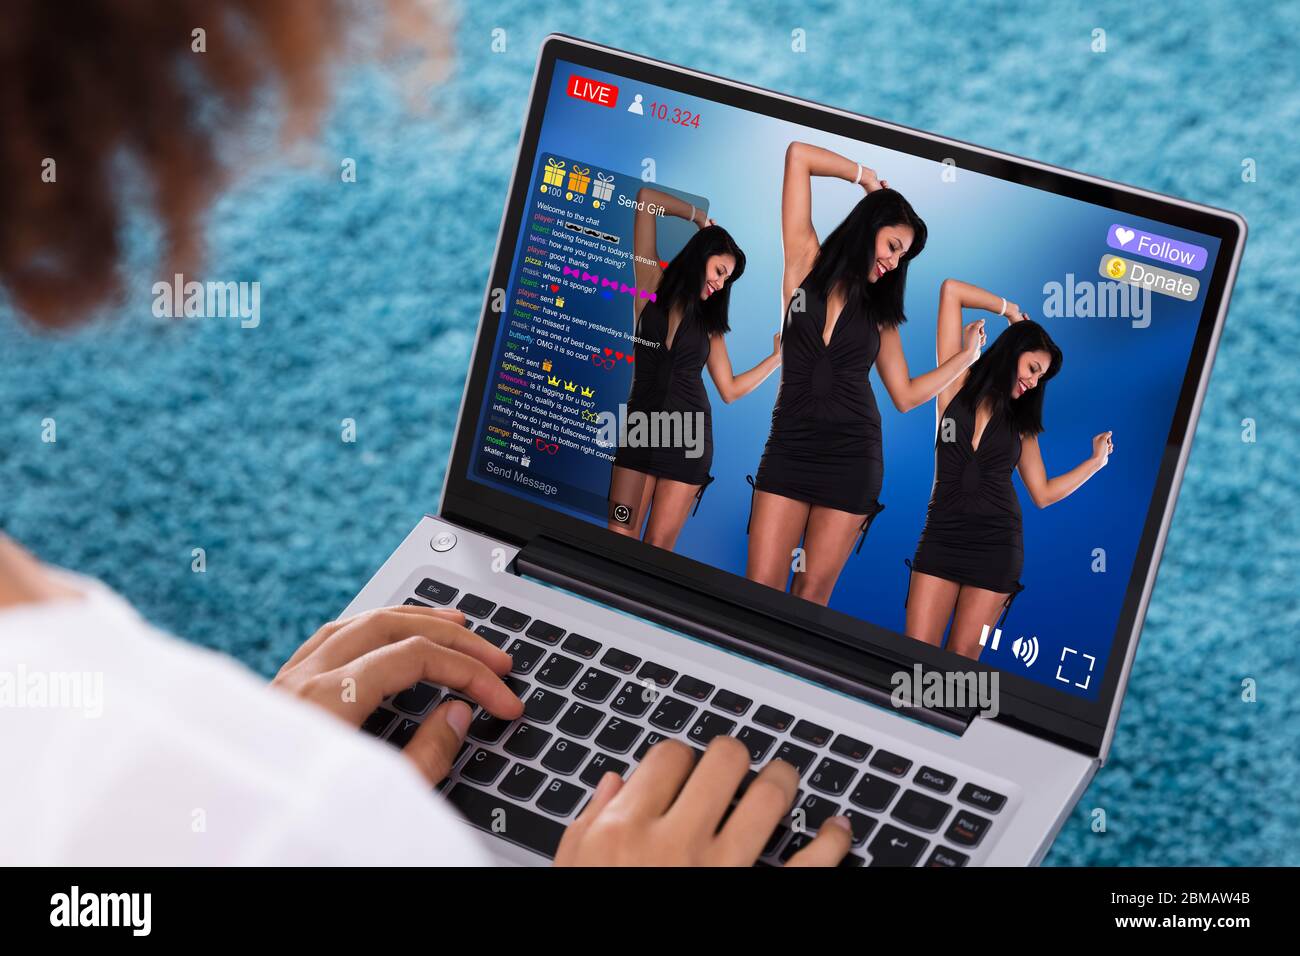 Streaming Live Dancing Video On Laptop Computer Stock Photo